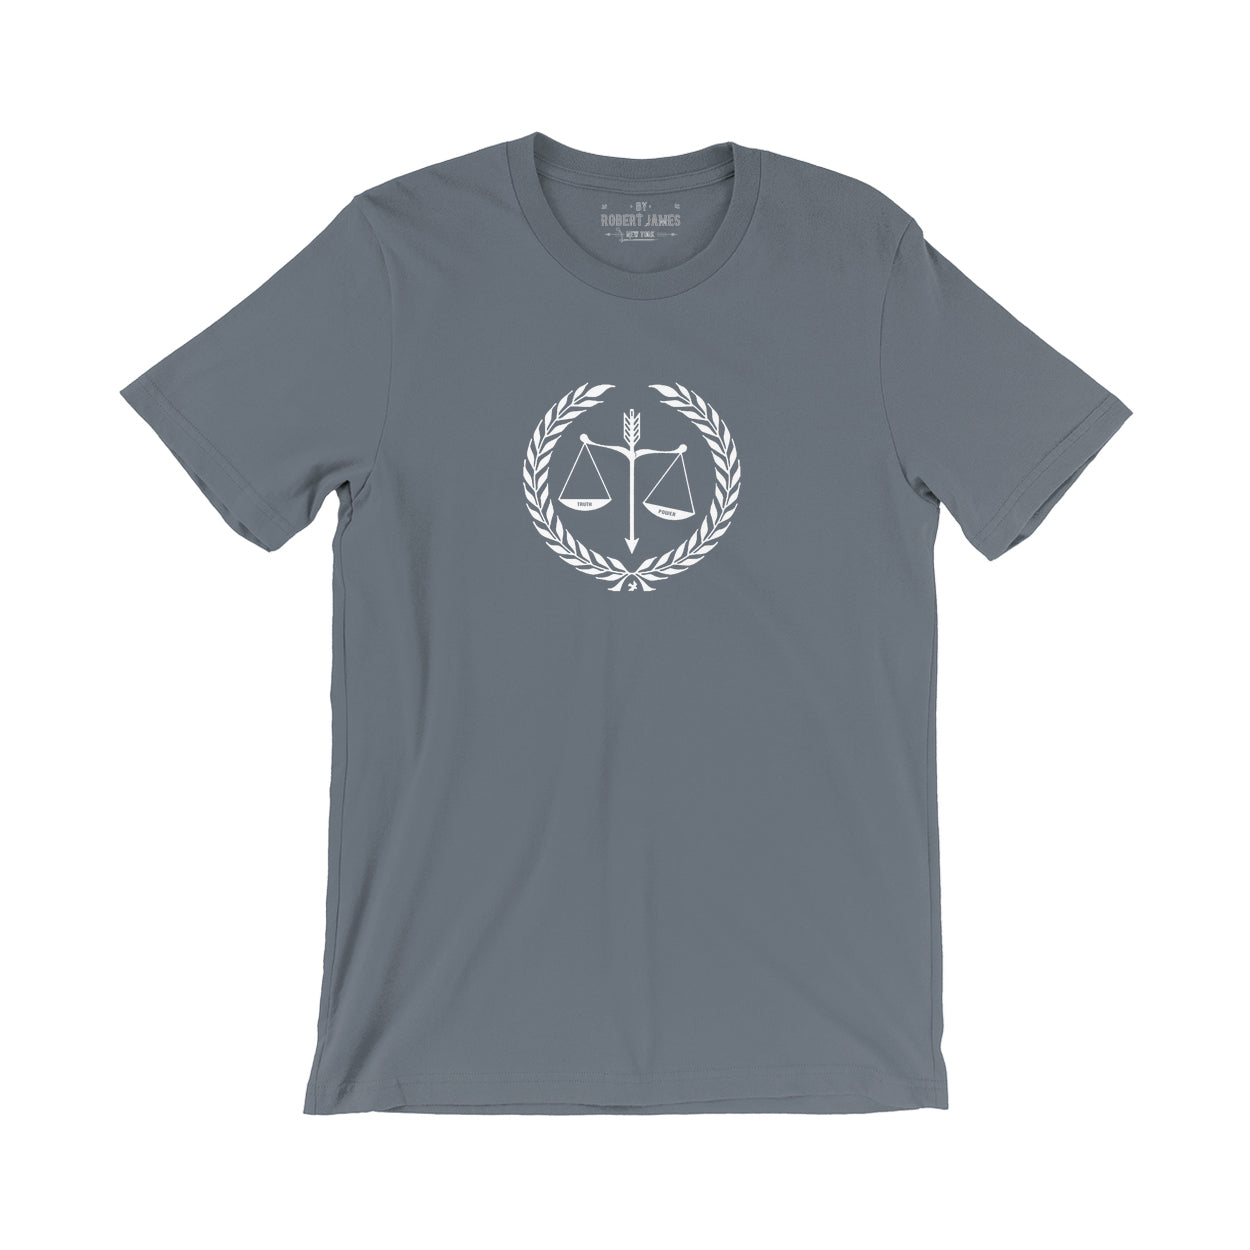 TRUTH IN JUSTICE // T-Shirts